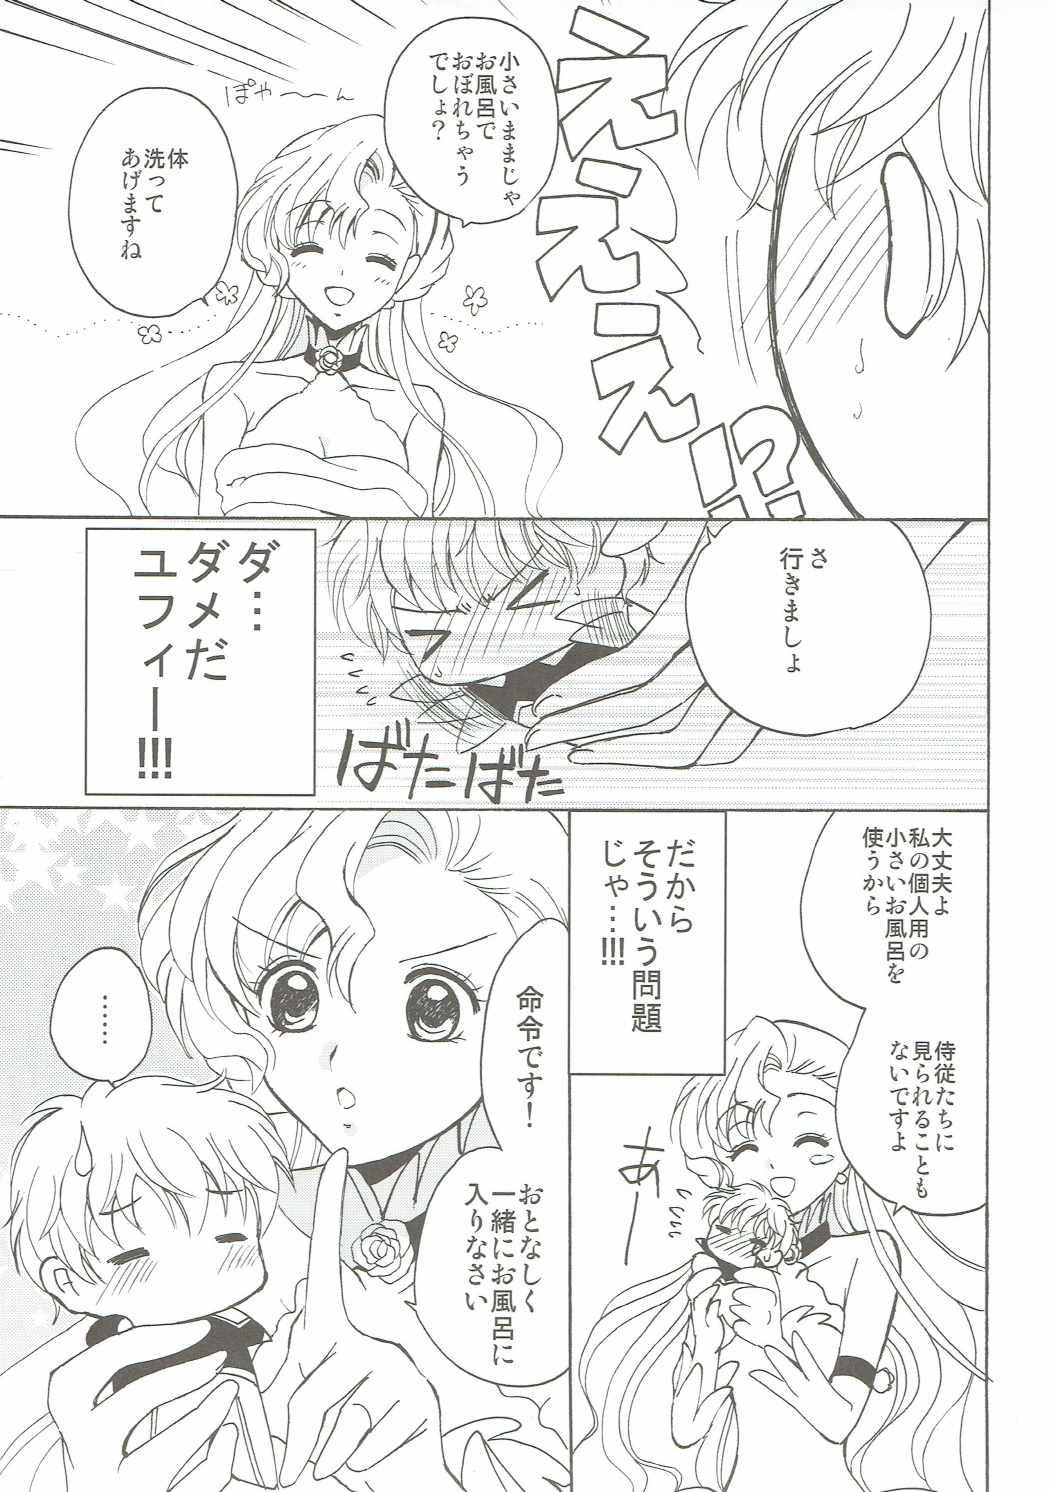 Village Lovely Baby - Code geass White Chick - Page 8